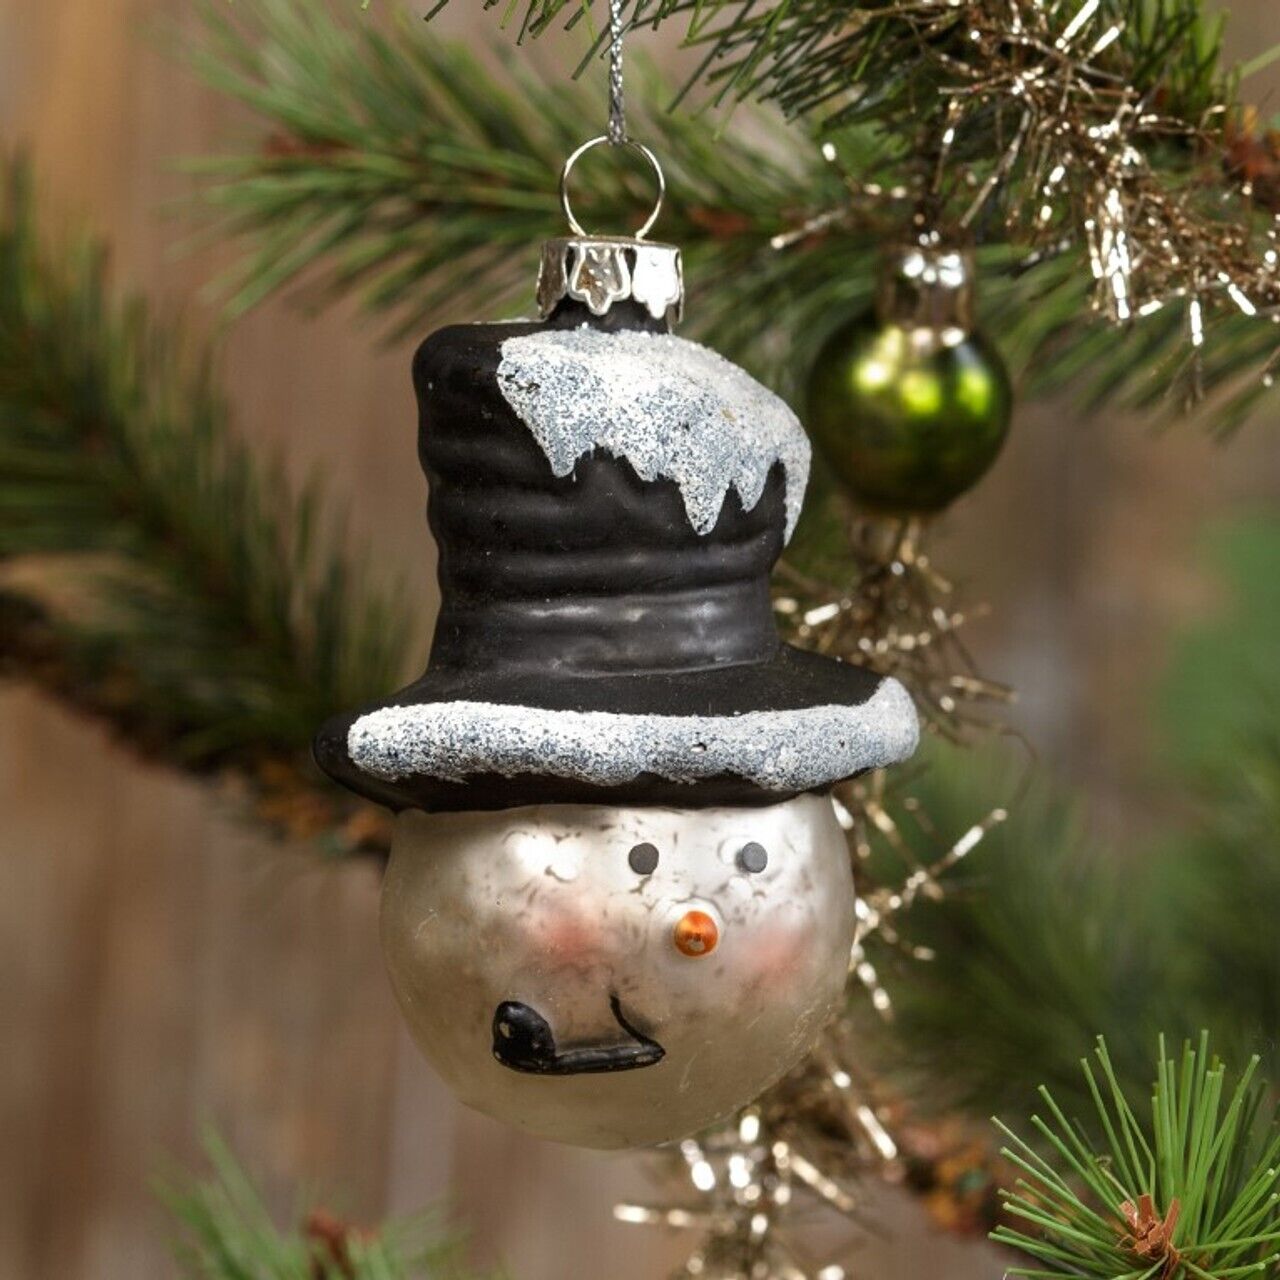 Snowman with Black Top Hat Mercury Glass Christmas Ornament Small Version